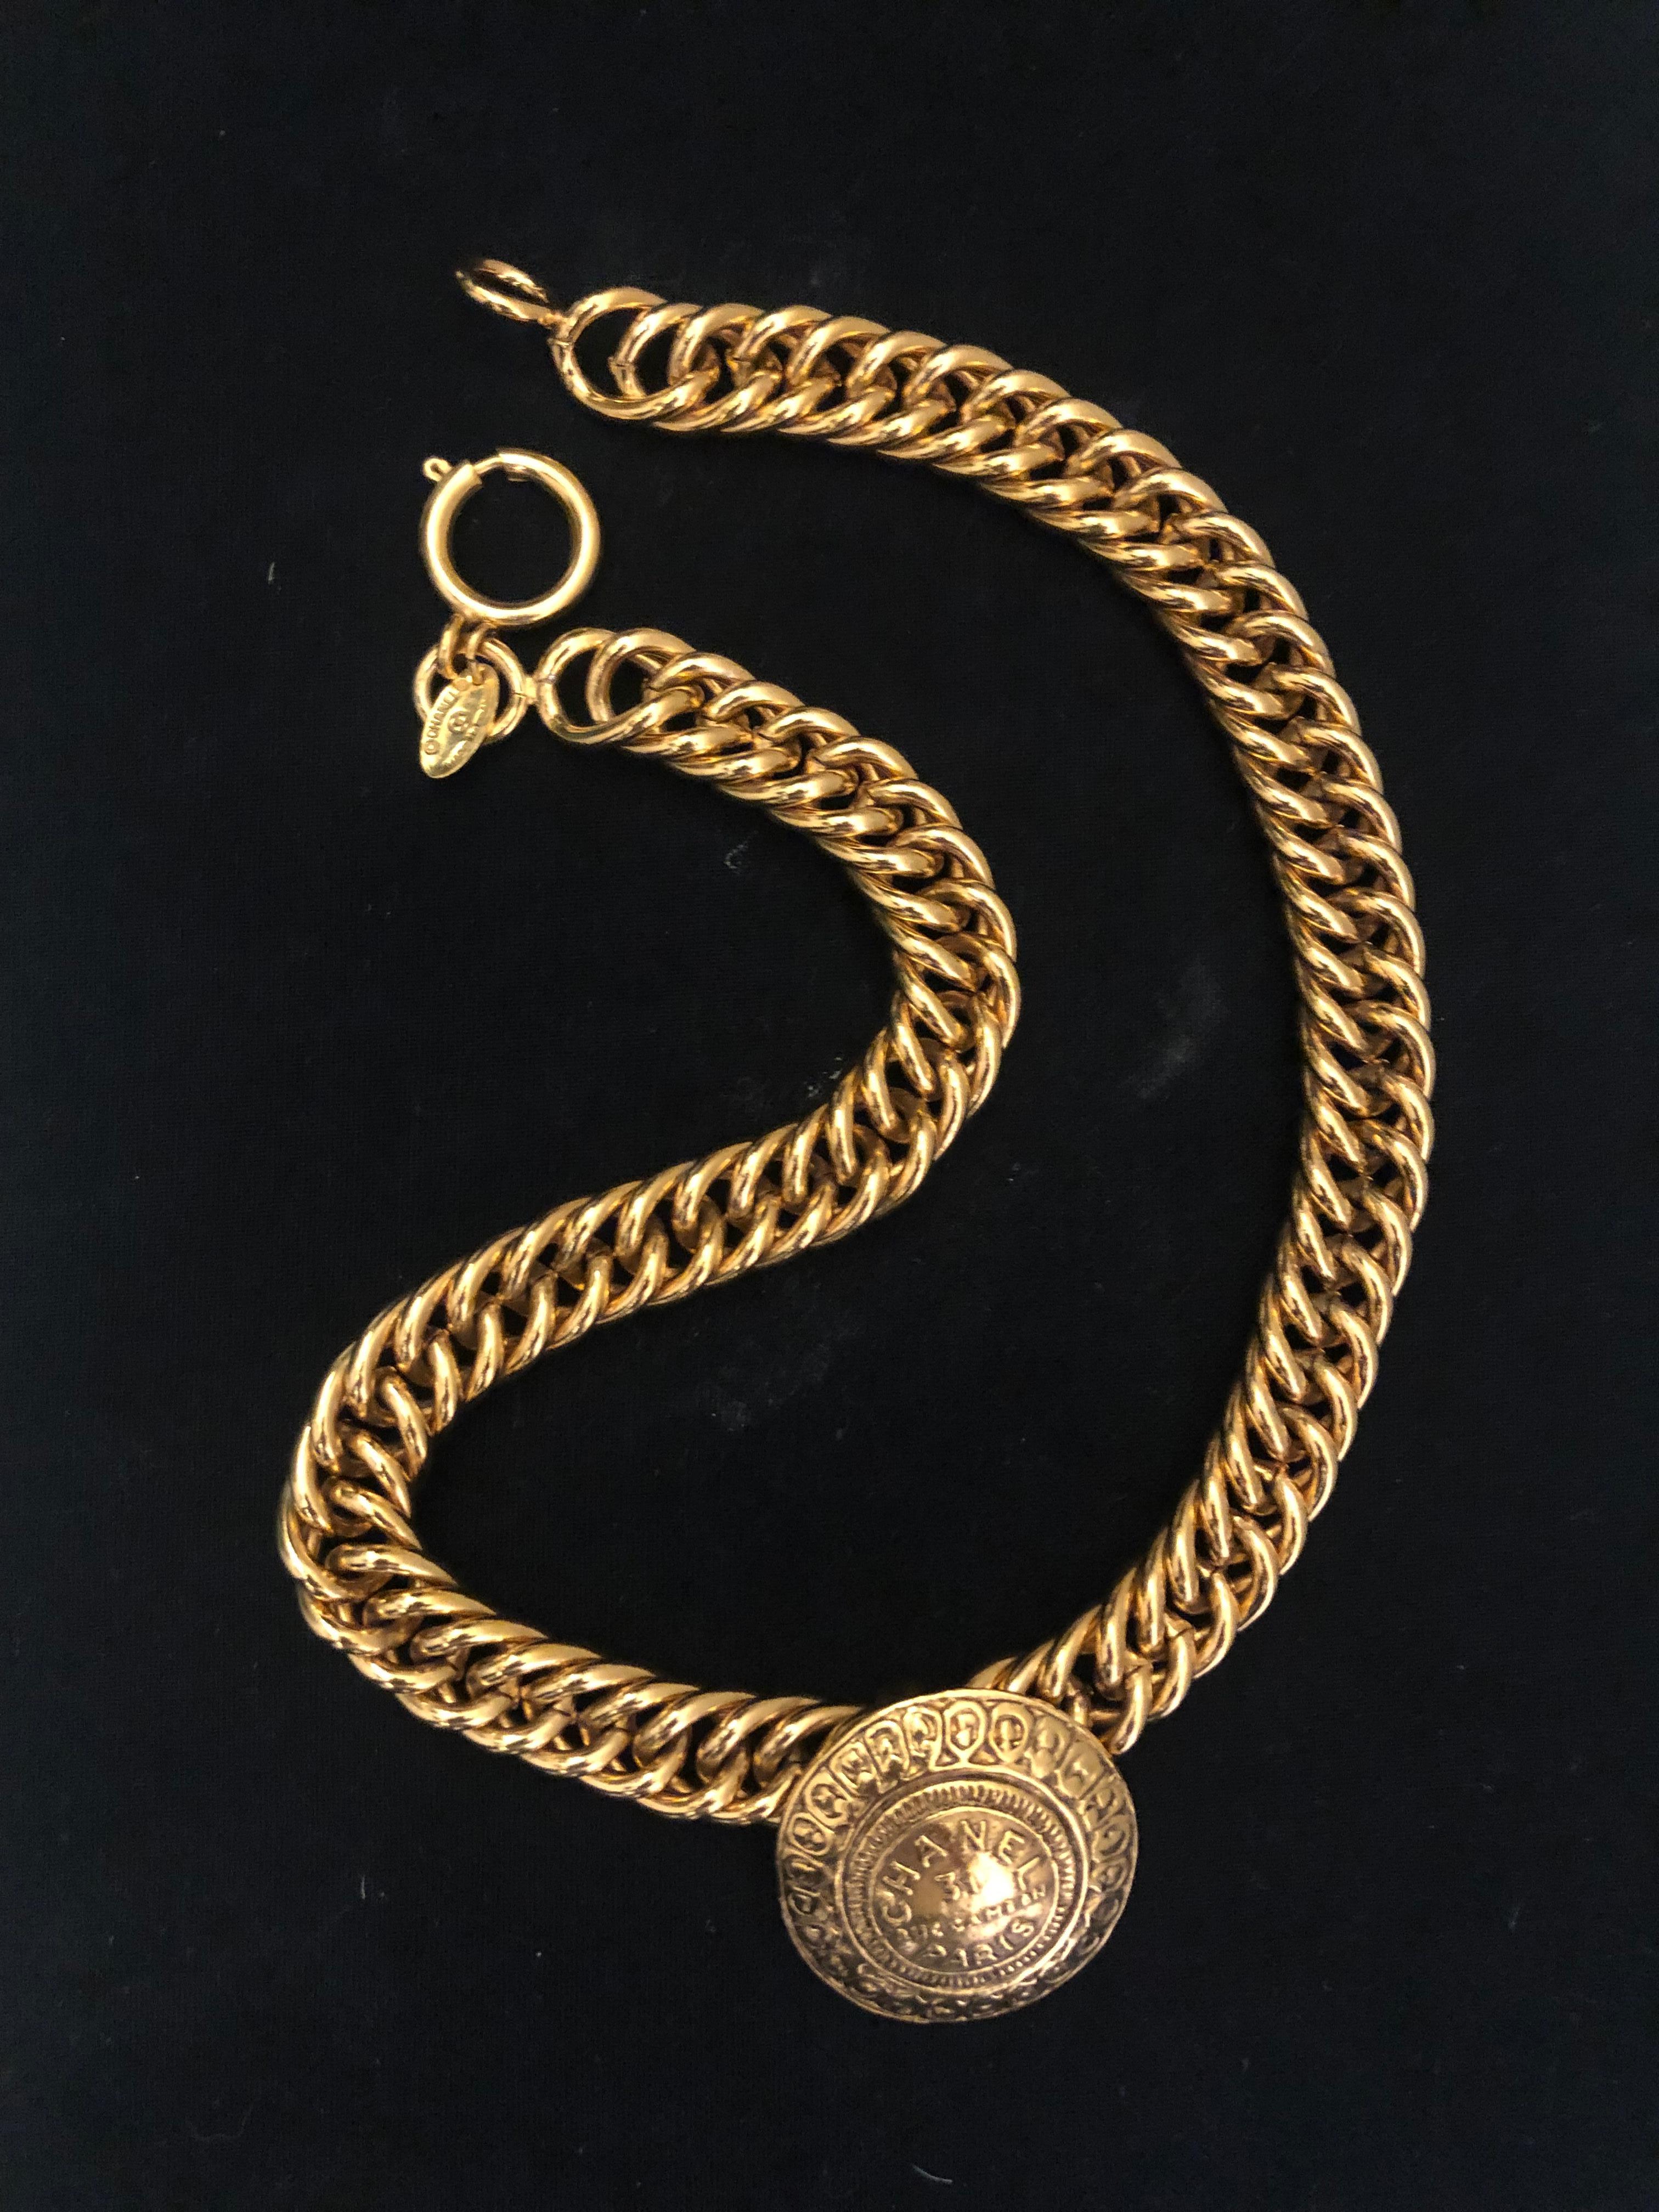 Vintage CHANEL gold toned short chain necklace featuring a 31 Rue Cambon Byzantine charm on a sturdy chain. Measures approximately 43 cm Coin 3.2 cm in diameter. Stamped Chanel made in France. Spring ring closure. Comes with box.

Condition - MINT